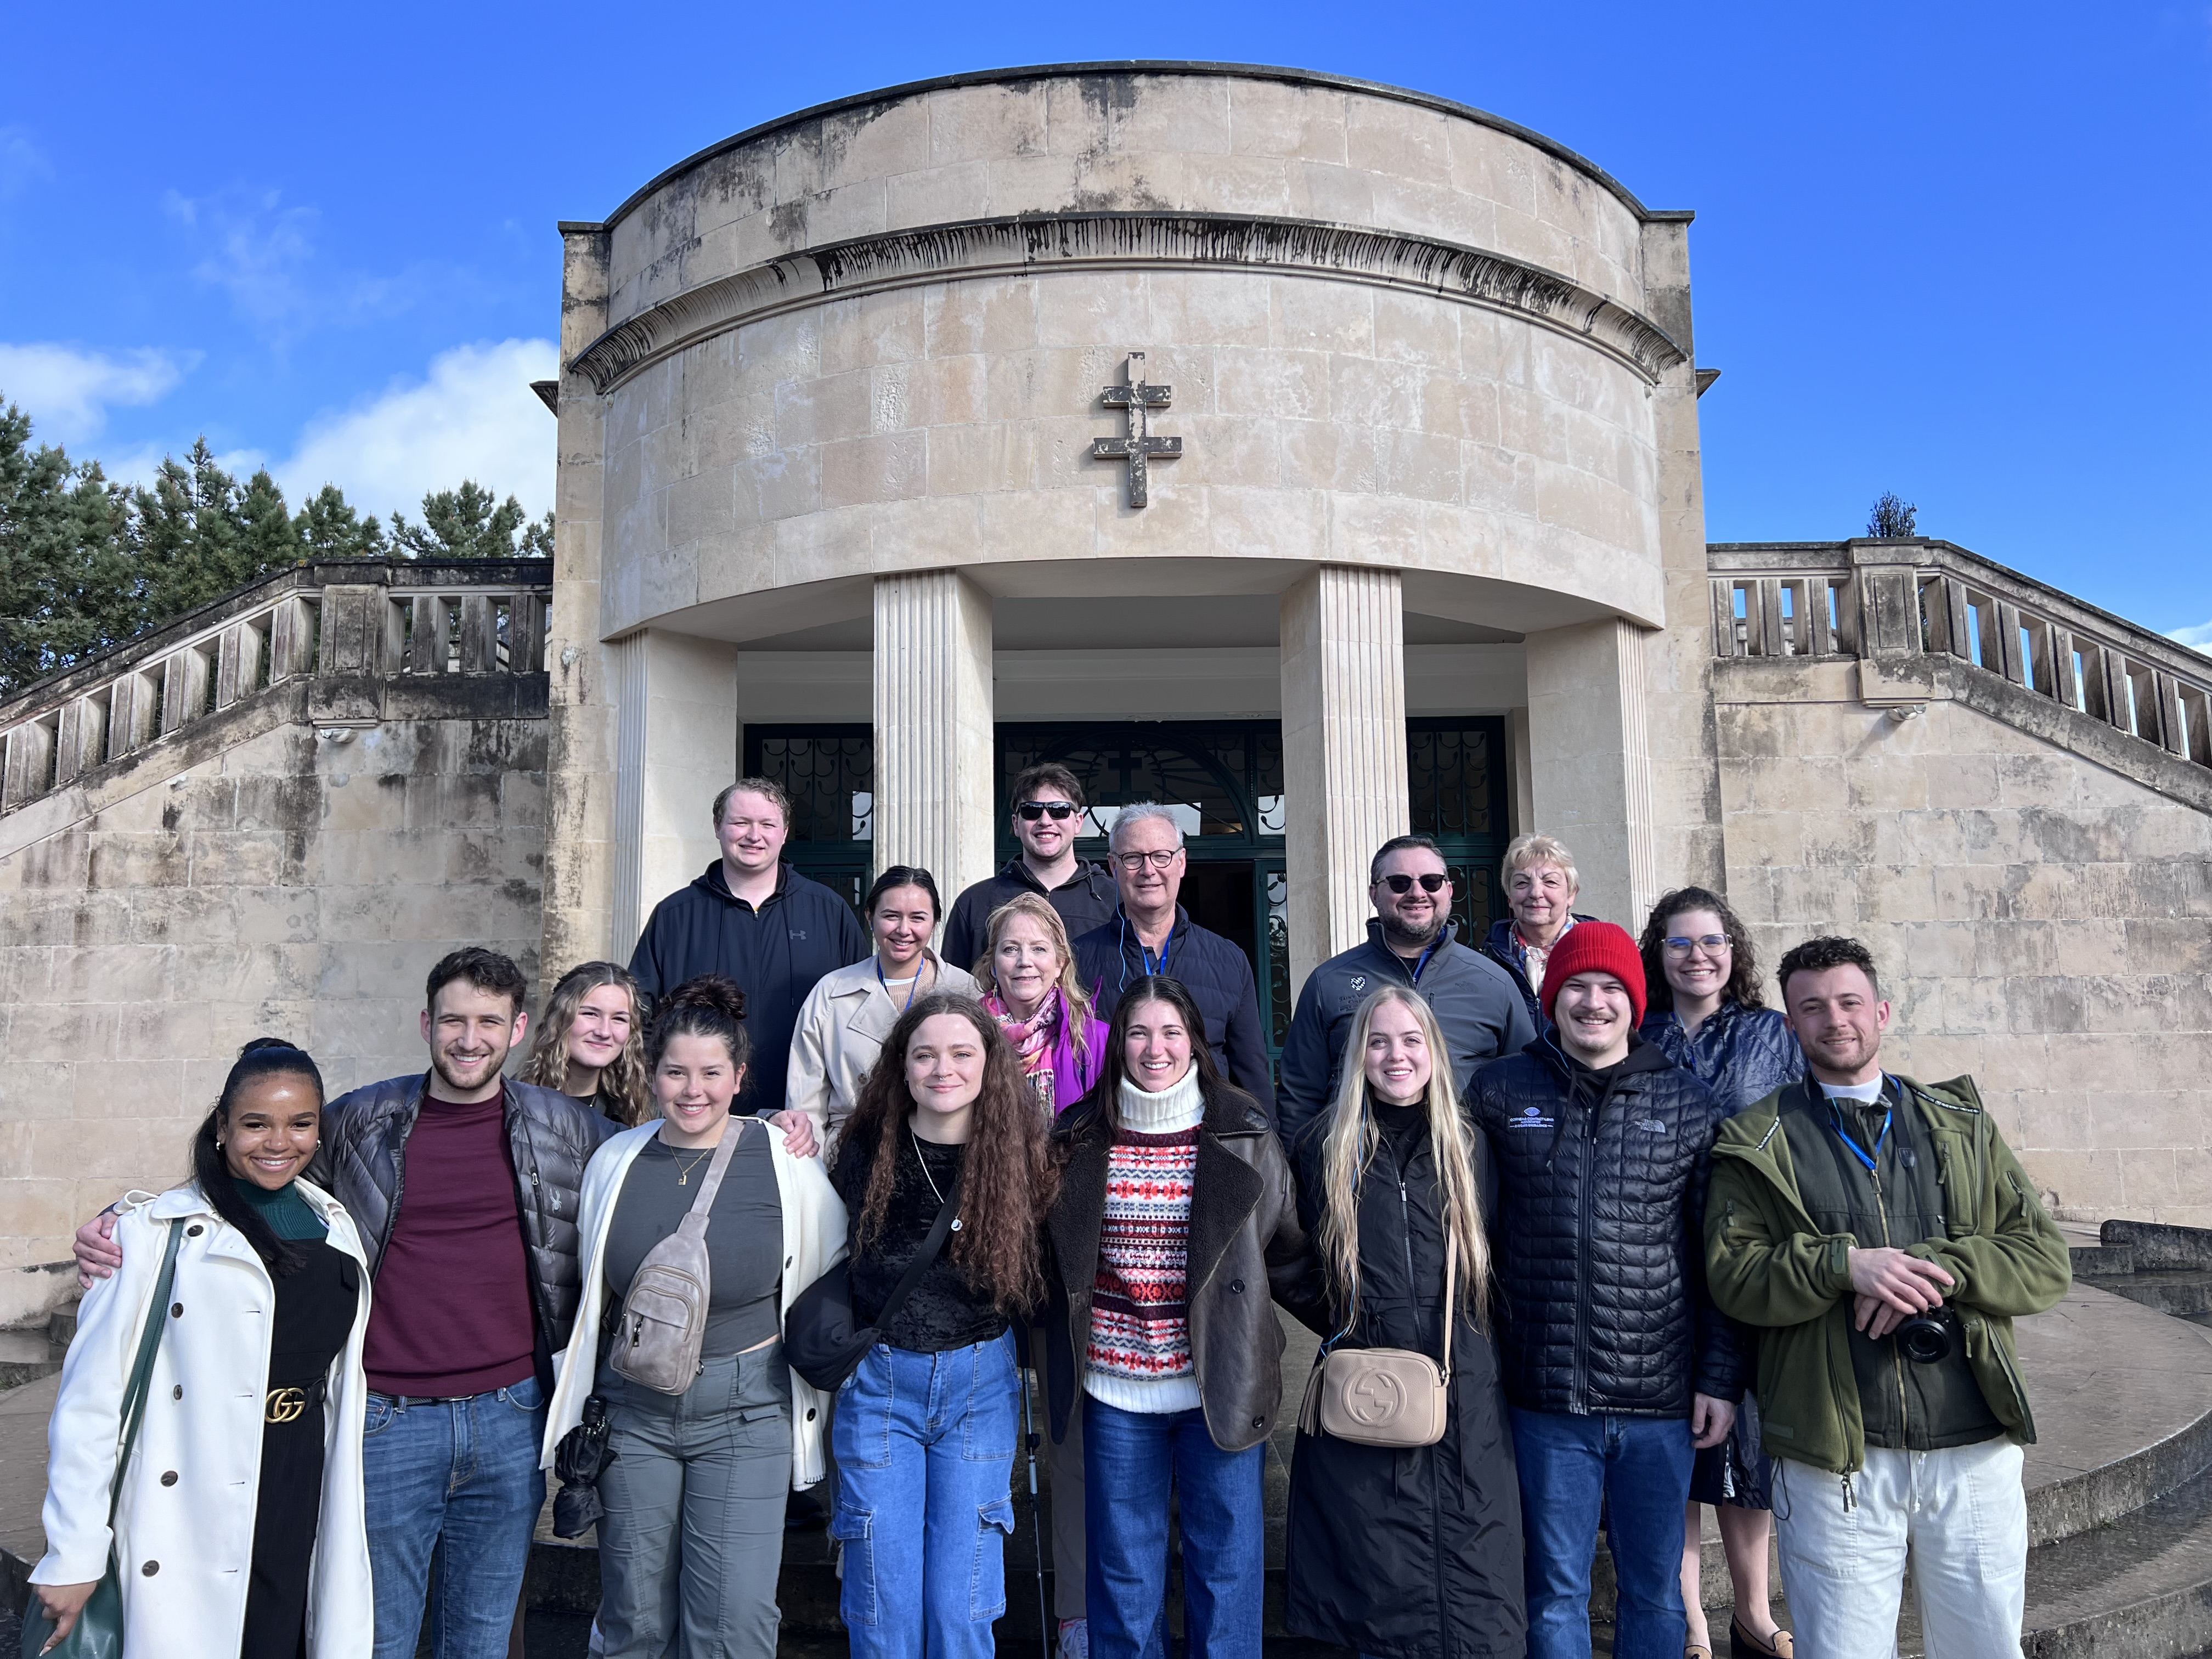 The group from Saint Vincent’s McKenna School at a tour stop in Fatima, Portugal